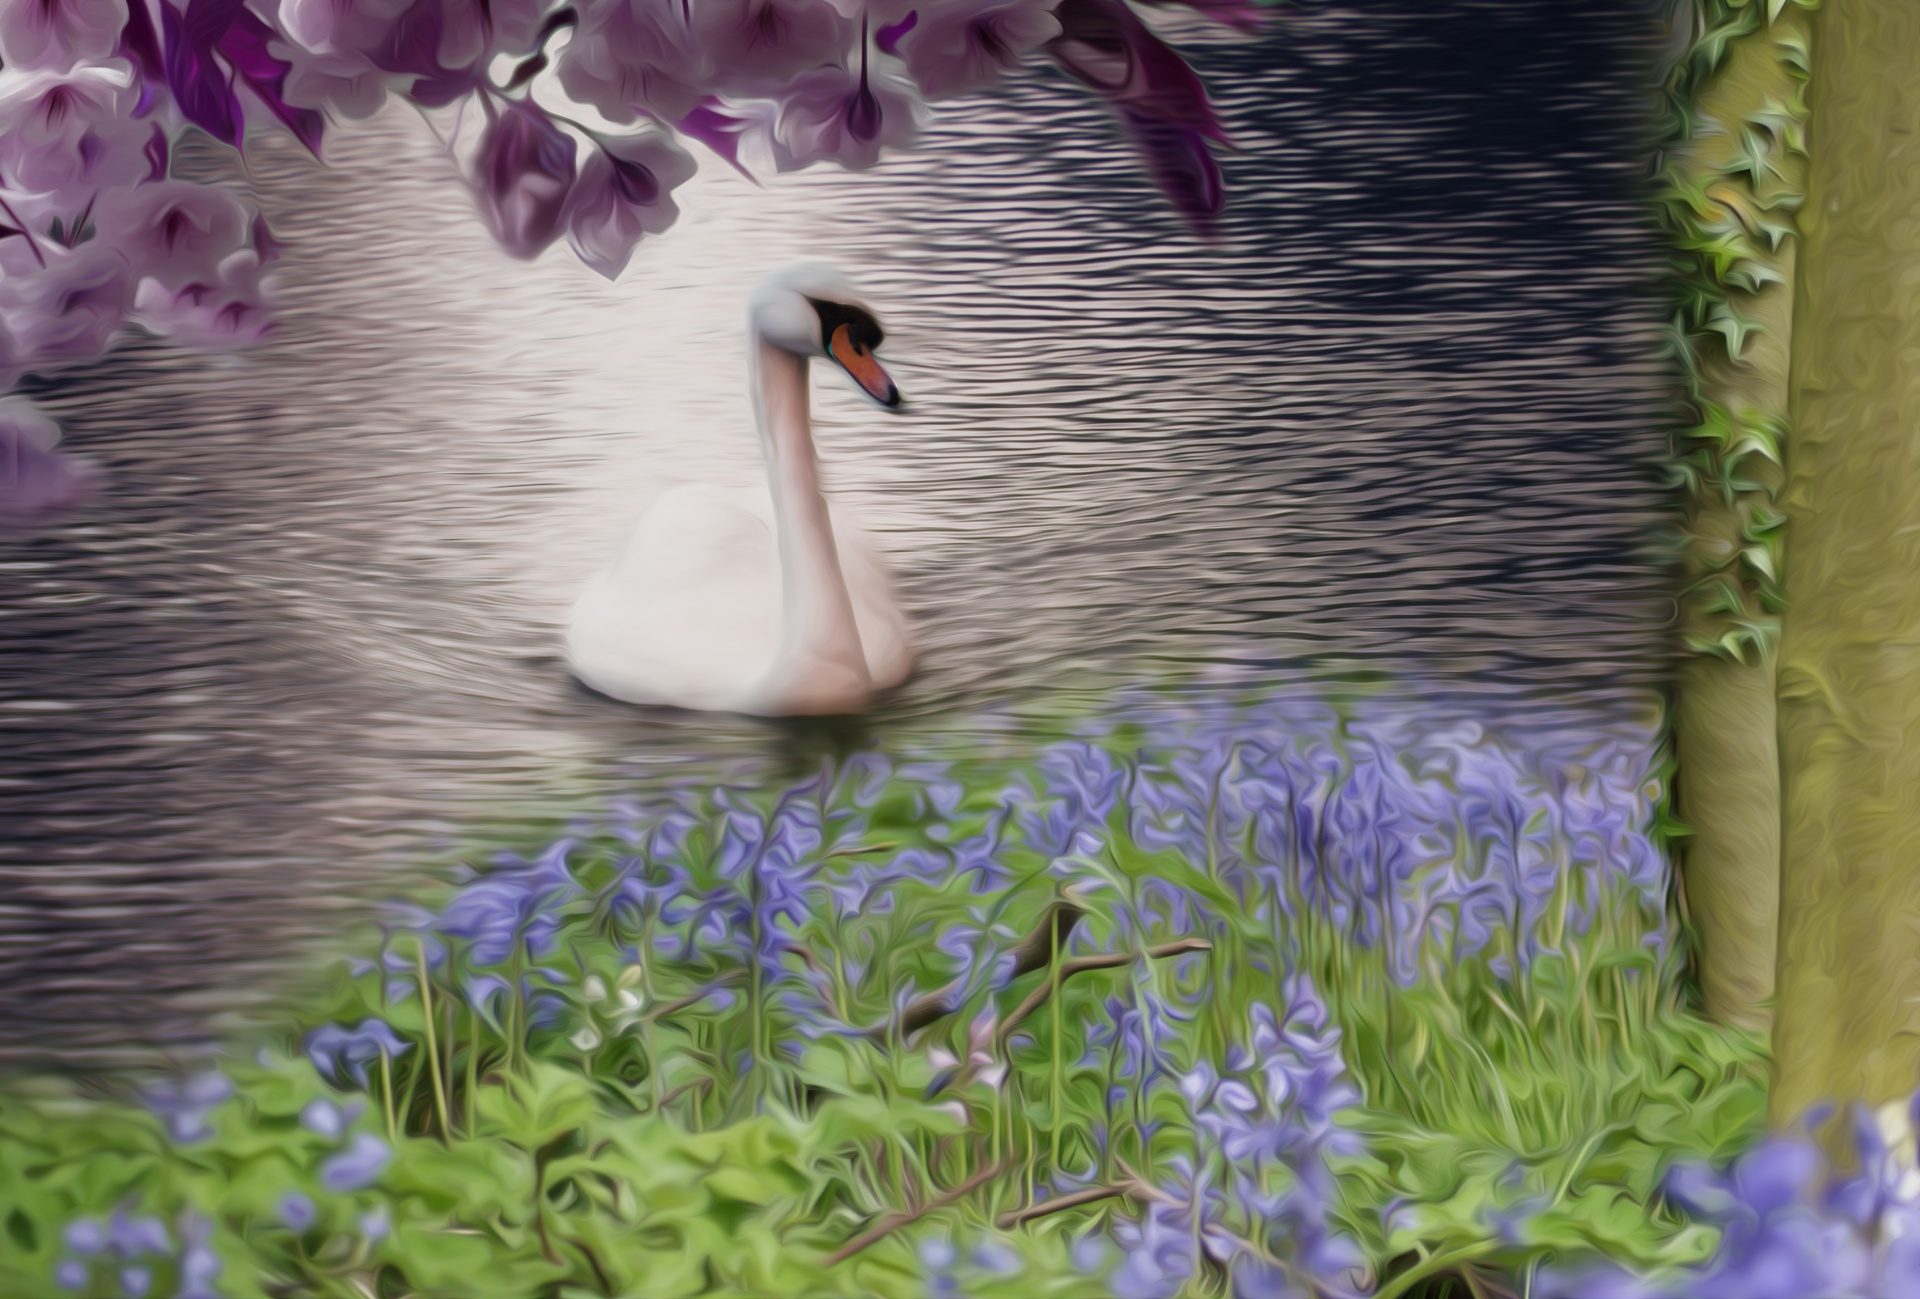 oil paint effect swan flowers commercial use background commercial use front free photo